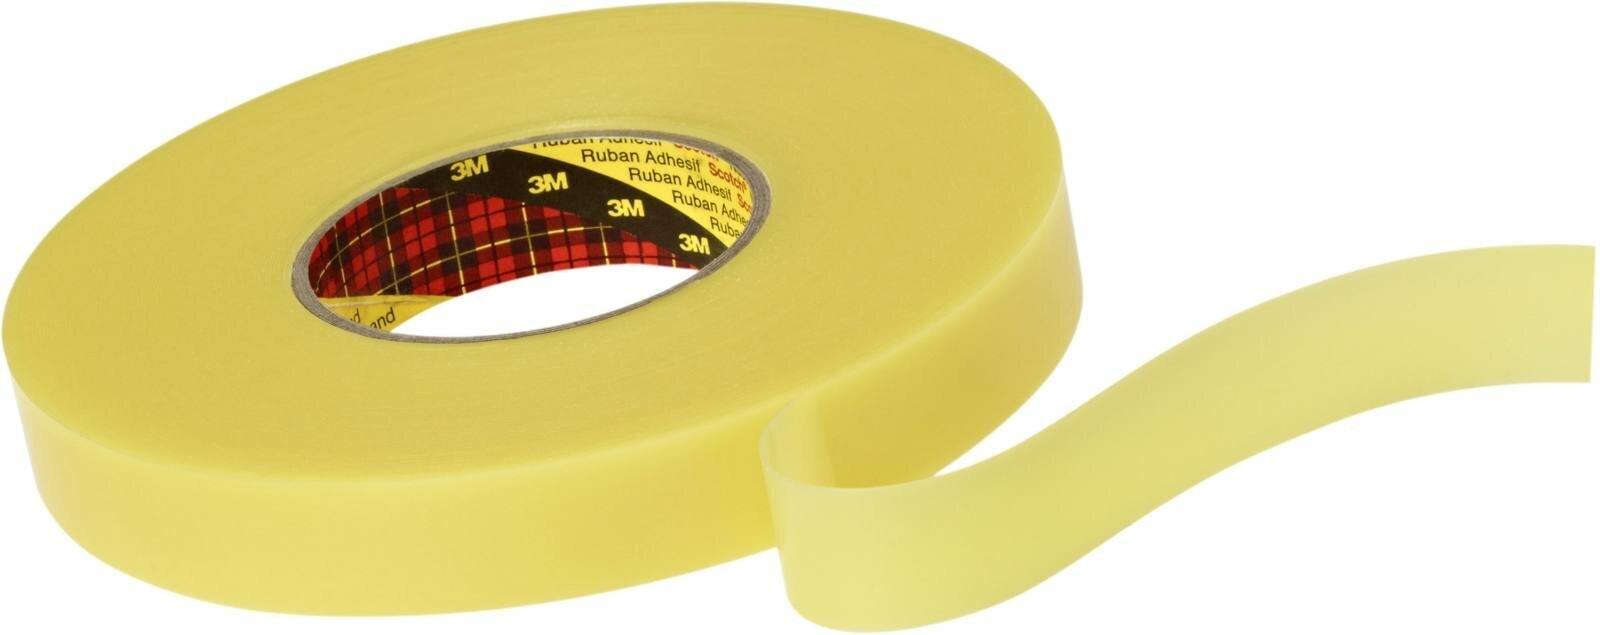 3M Double-sided removable adhesive tape 4656F, yellow, 25 mm x 33 m, 0.6 mm